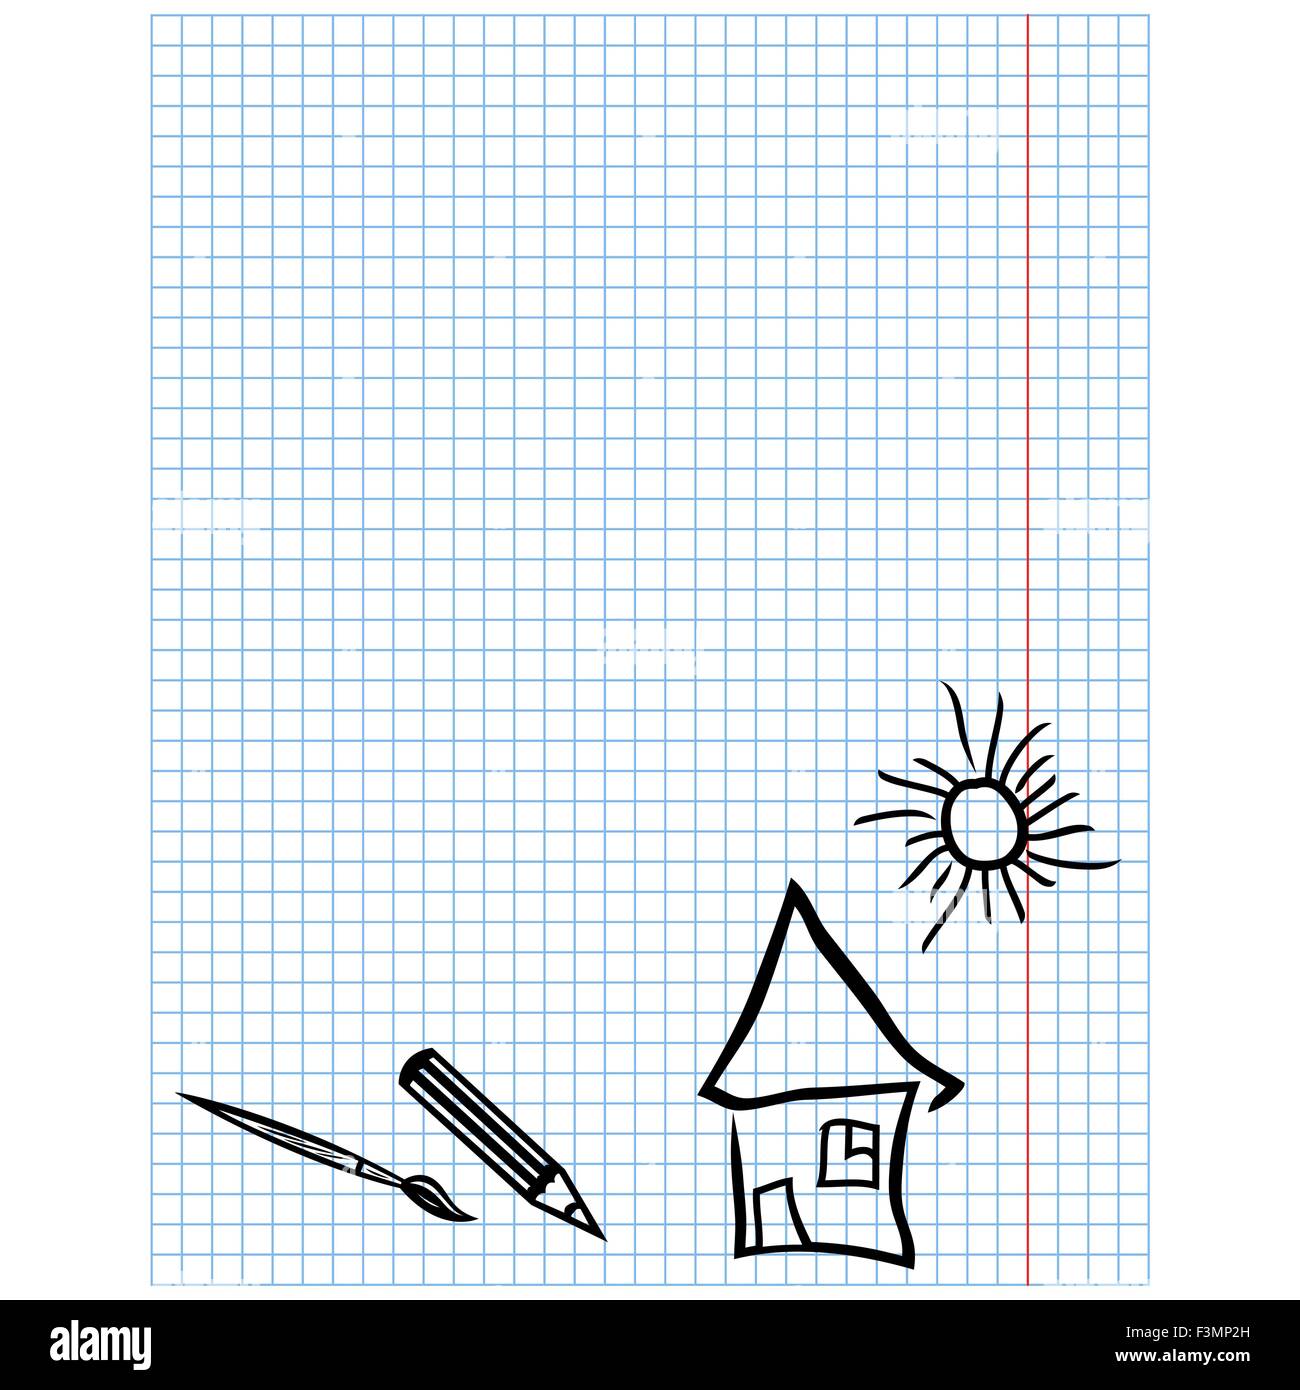 Childish simple drawings on checkered sheet with images of brush, pencil, house and sun, vector illustration Stock Vector